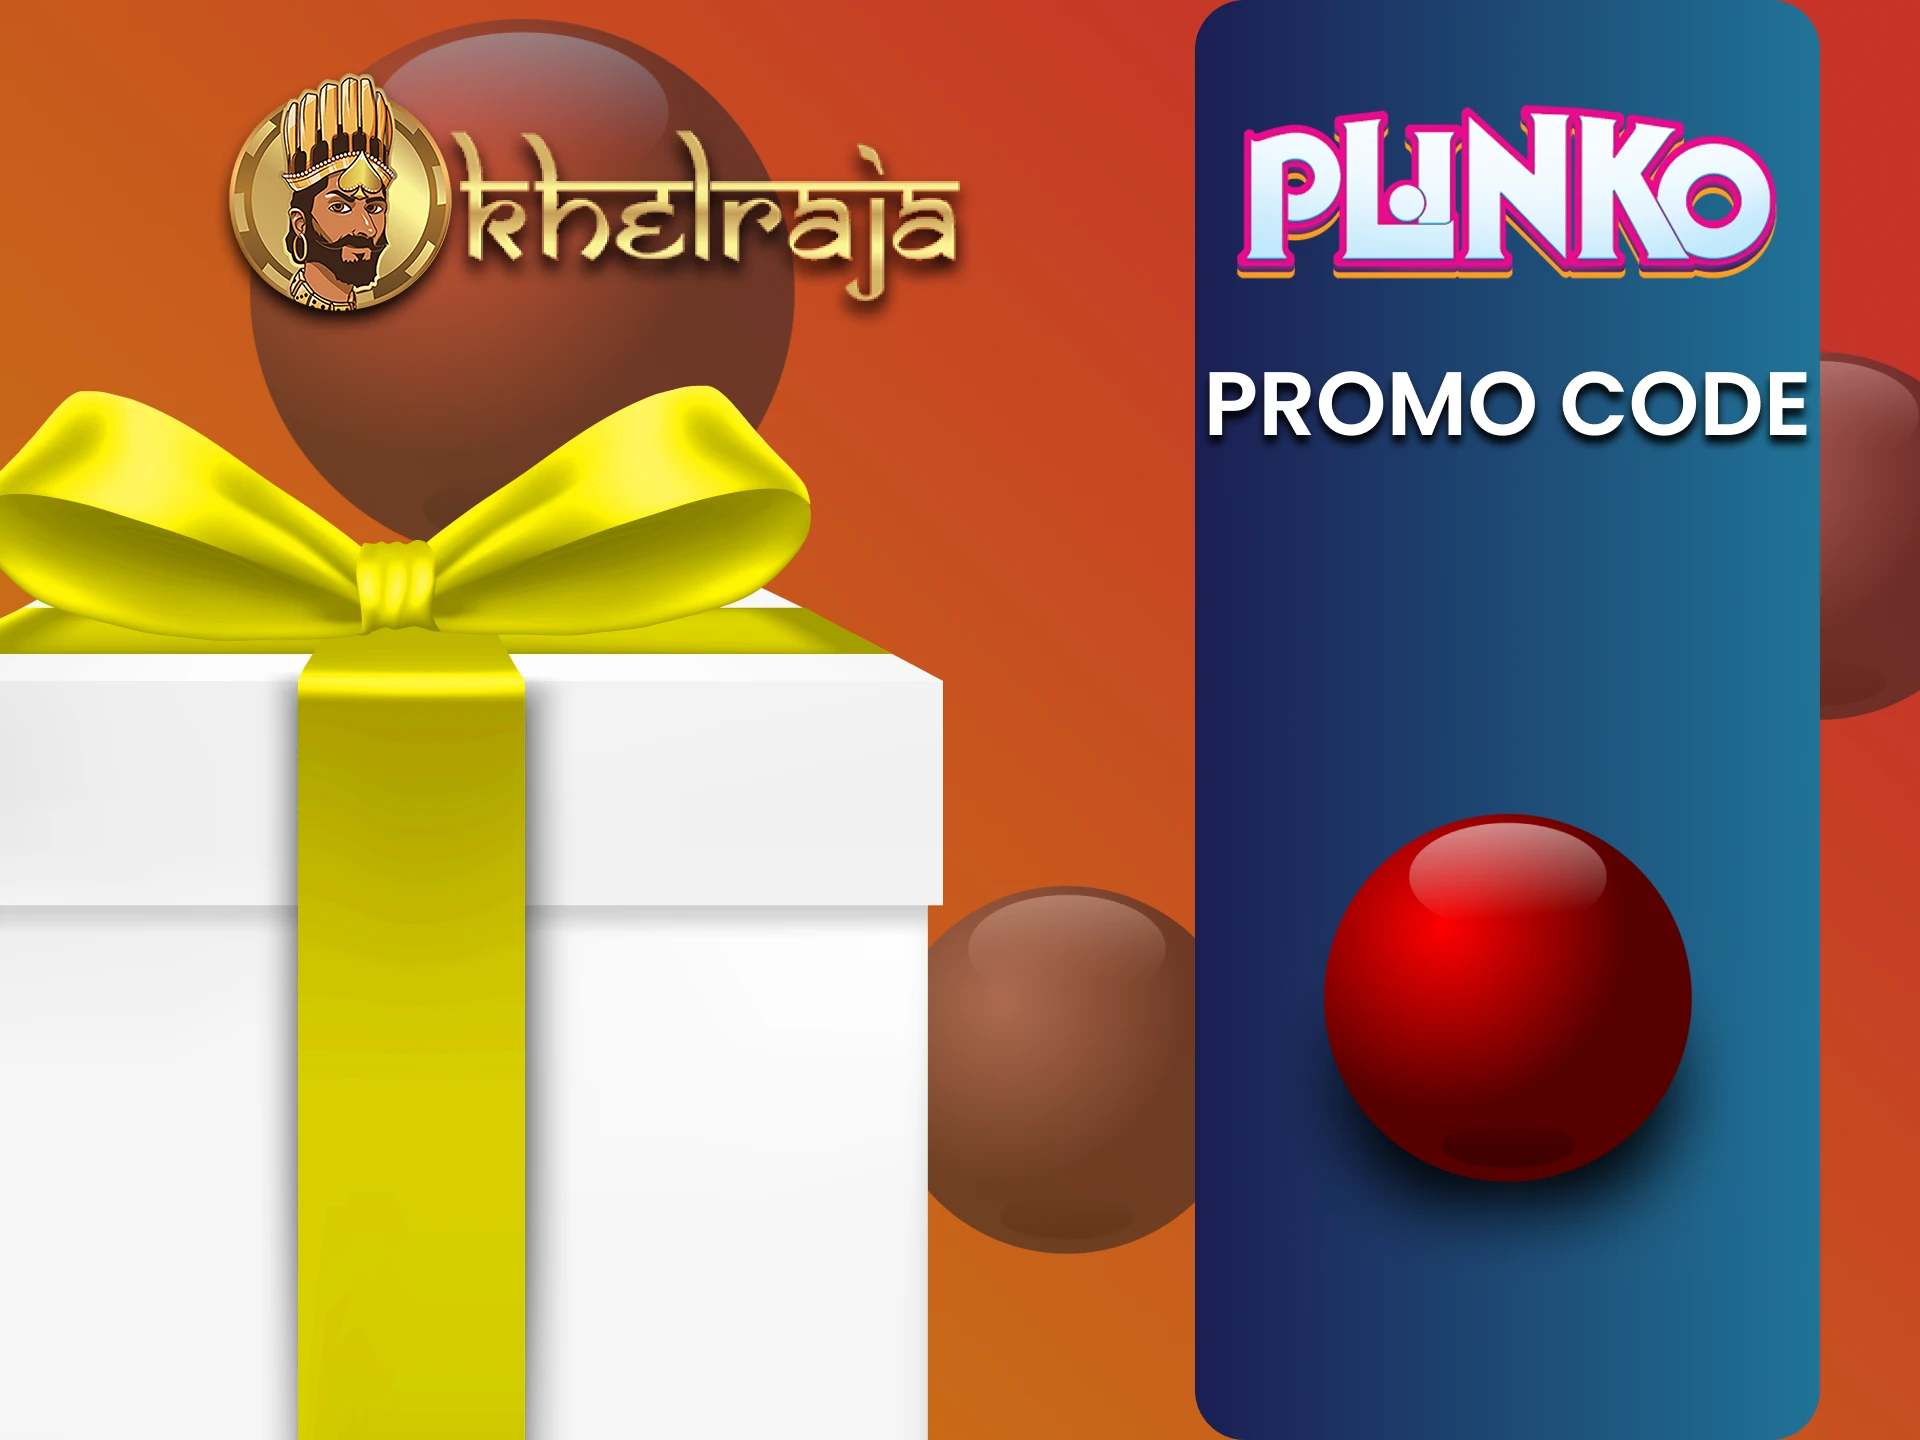 There is a promo code for the game Plinko from Khelraja.